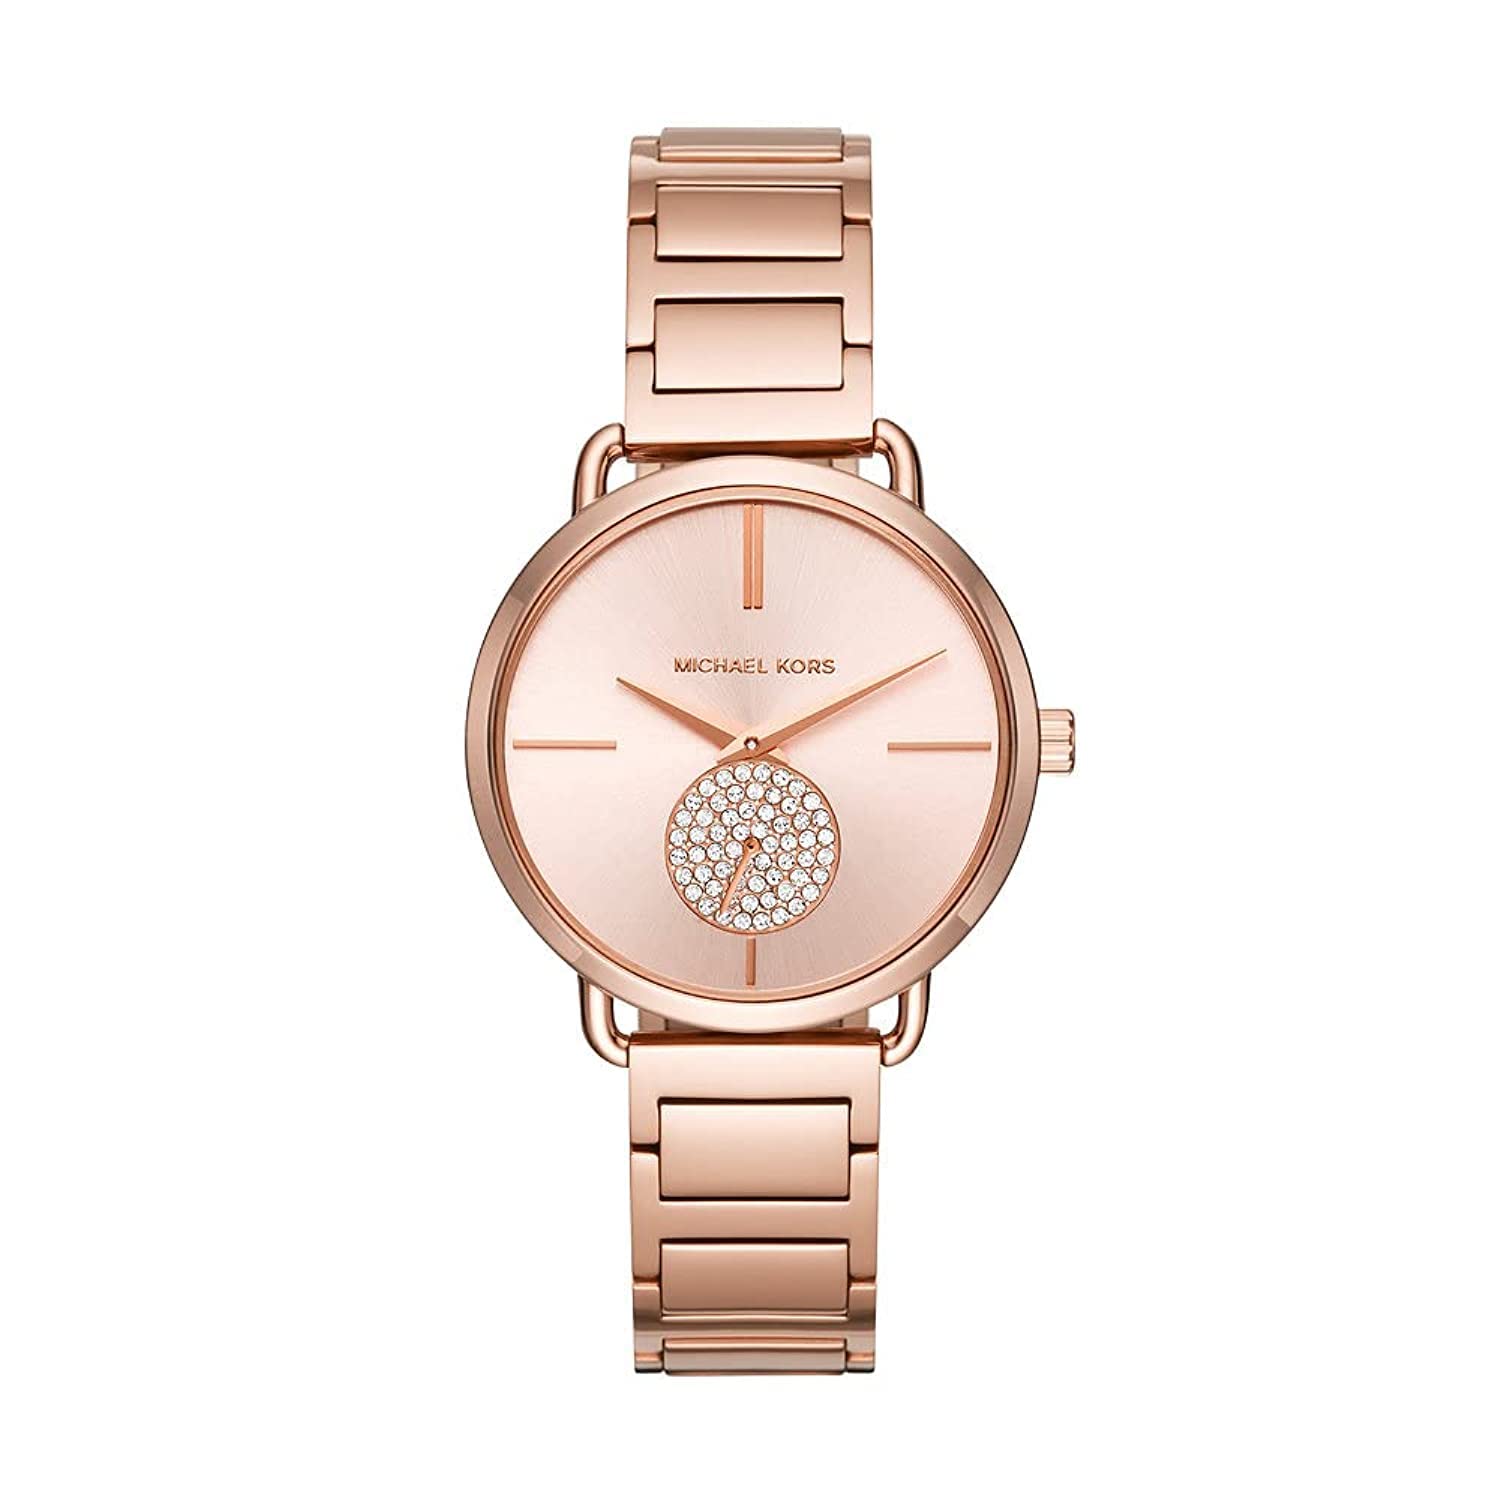 Michael Kors Jewellery  Watches  Luxe by Hugh Rice